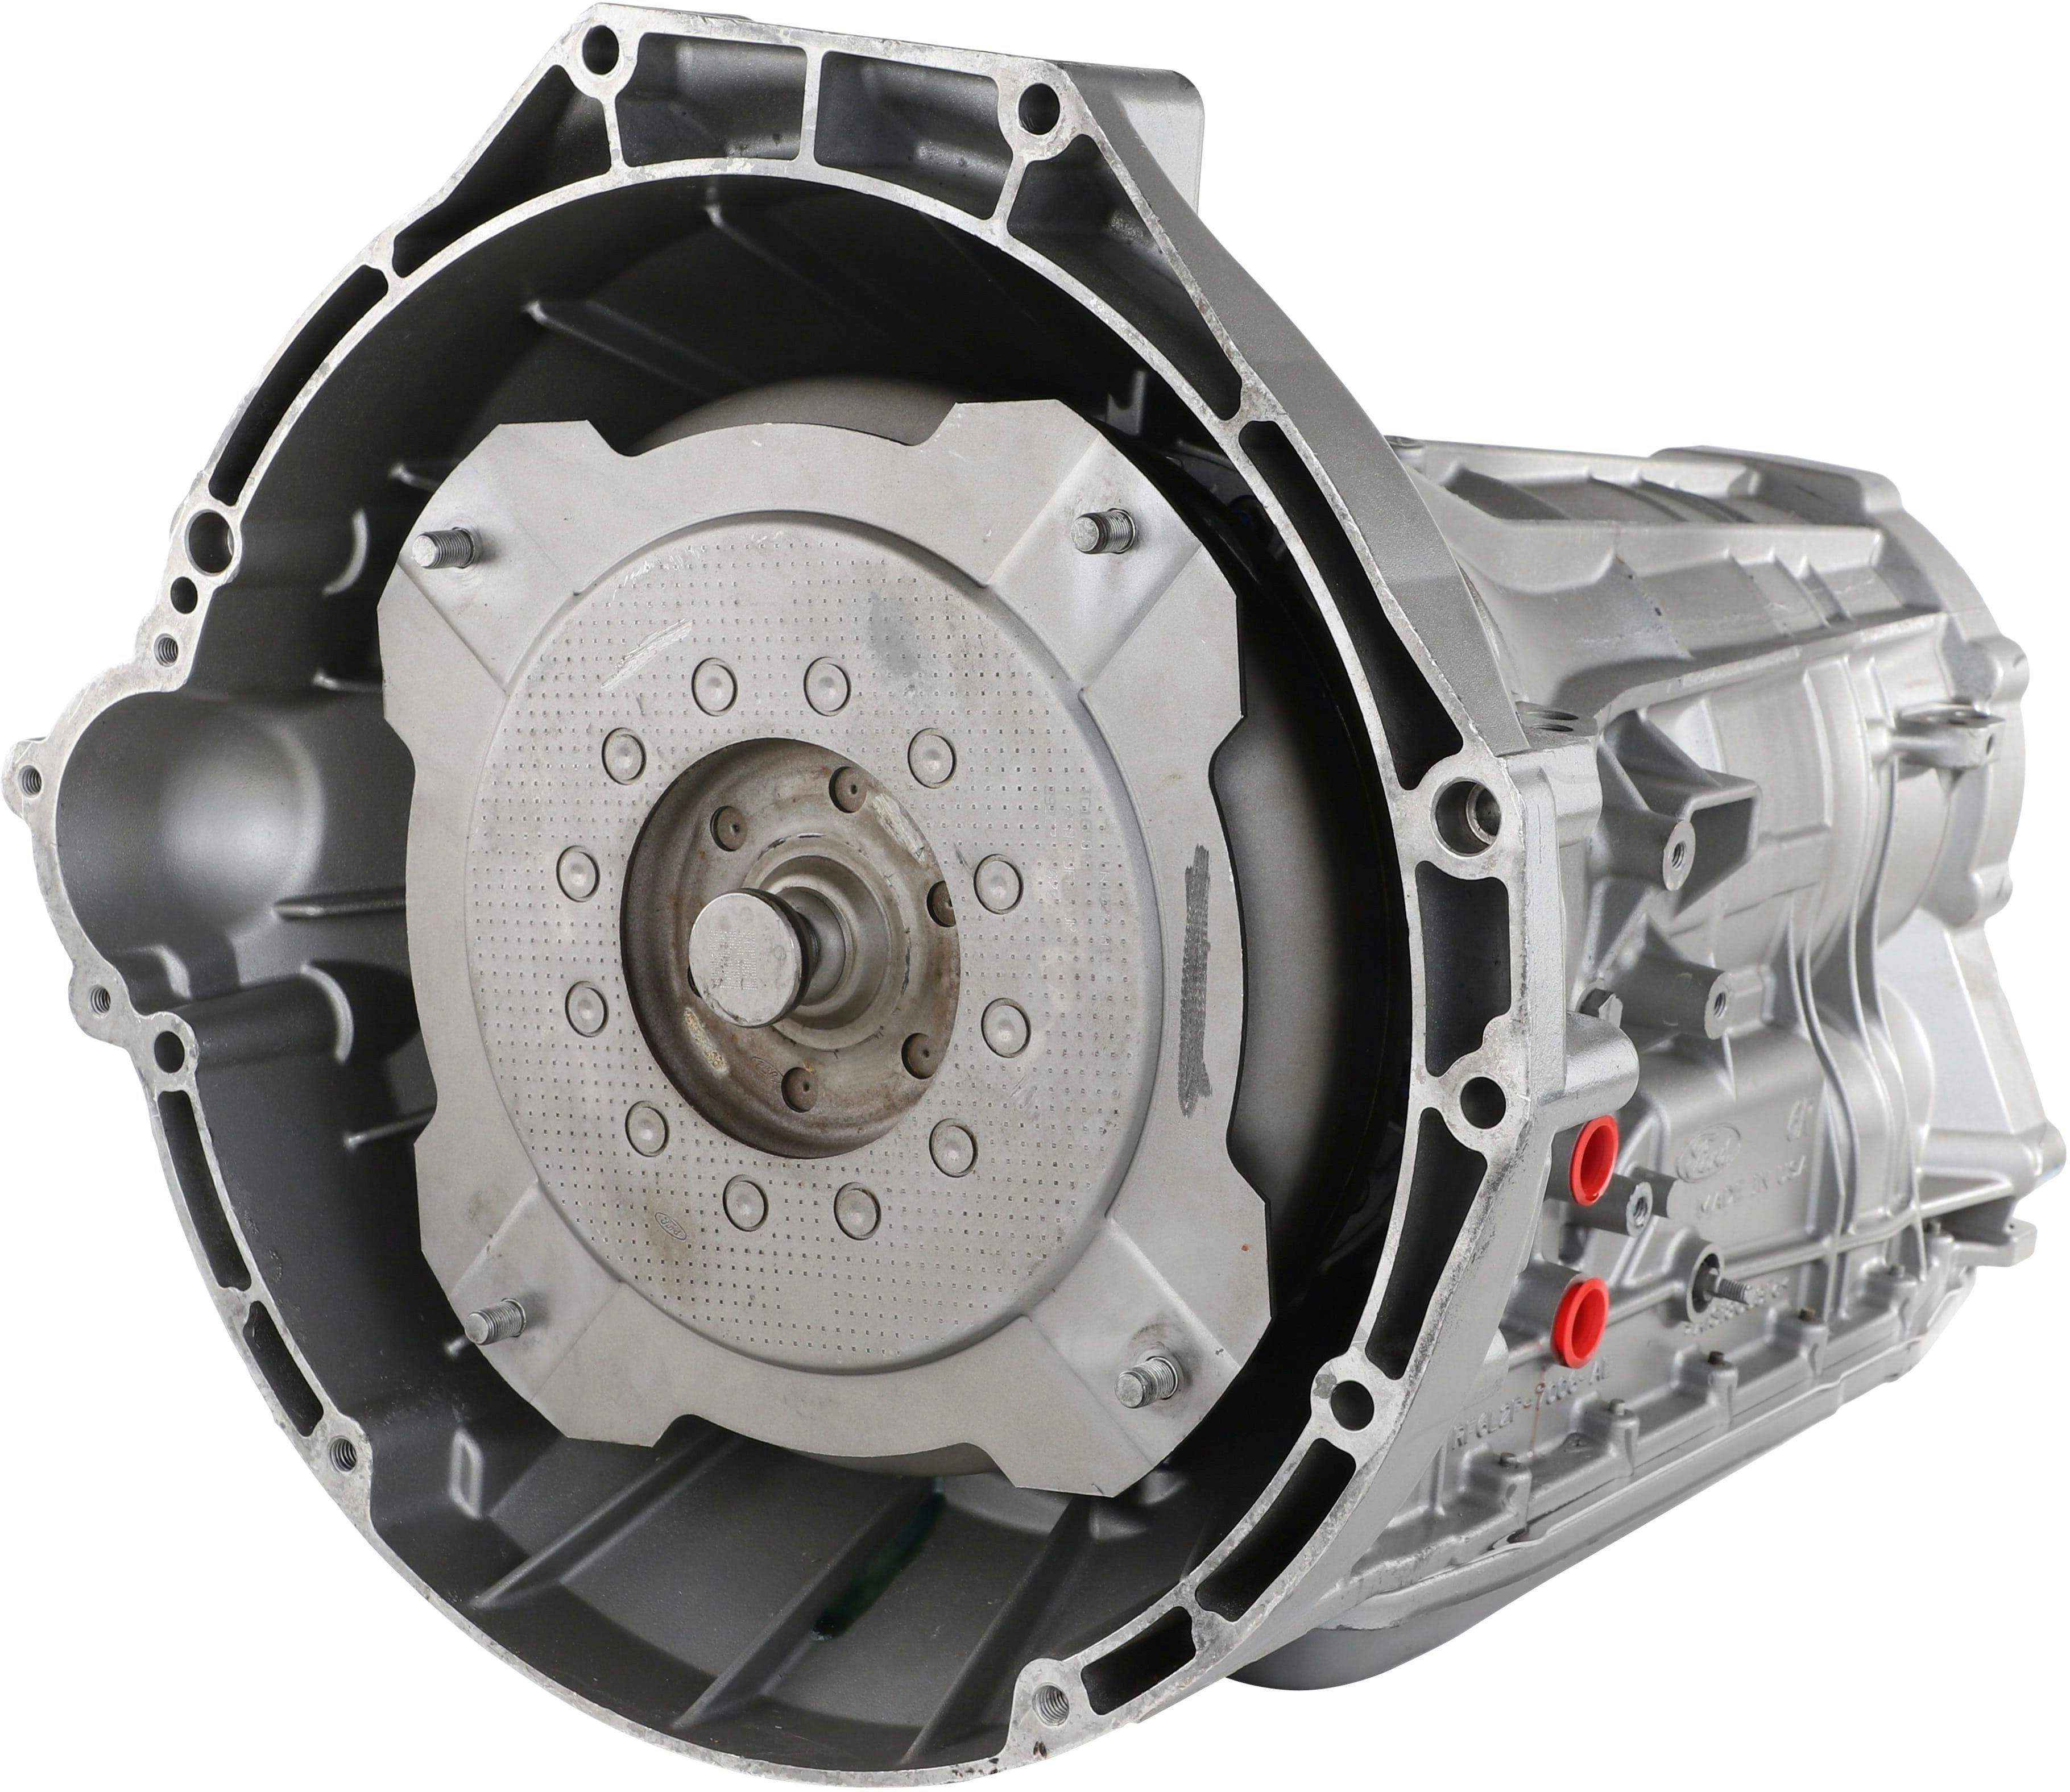 Automatic Transmission for 2007-2008 Ford Explorer/Explorer Sport Trac and Mercury Mountaineer 4WD with 4.6L V8 Engine